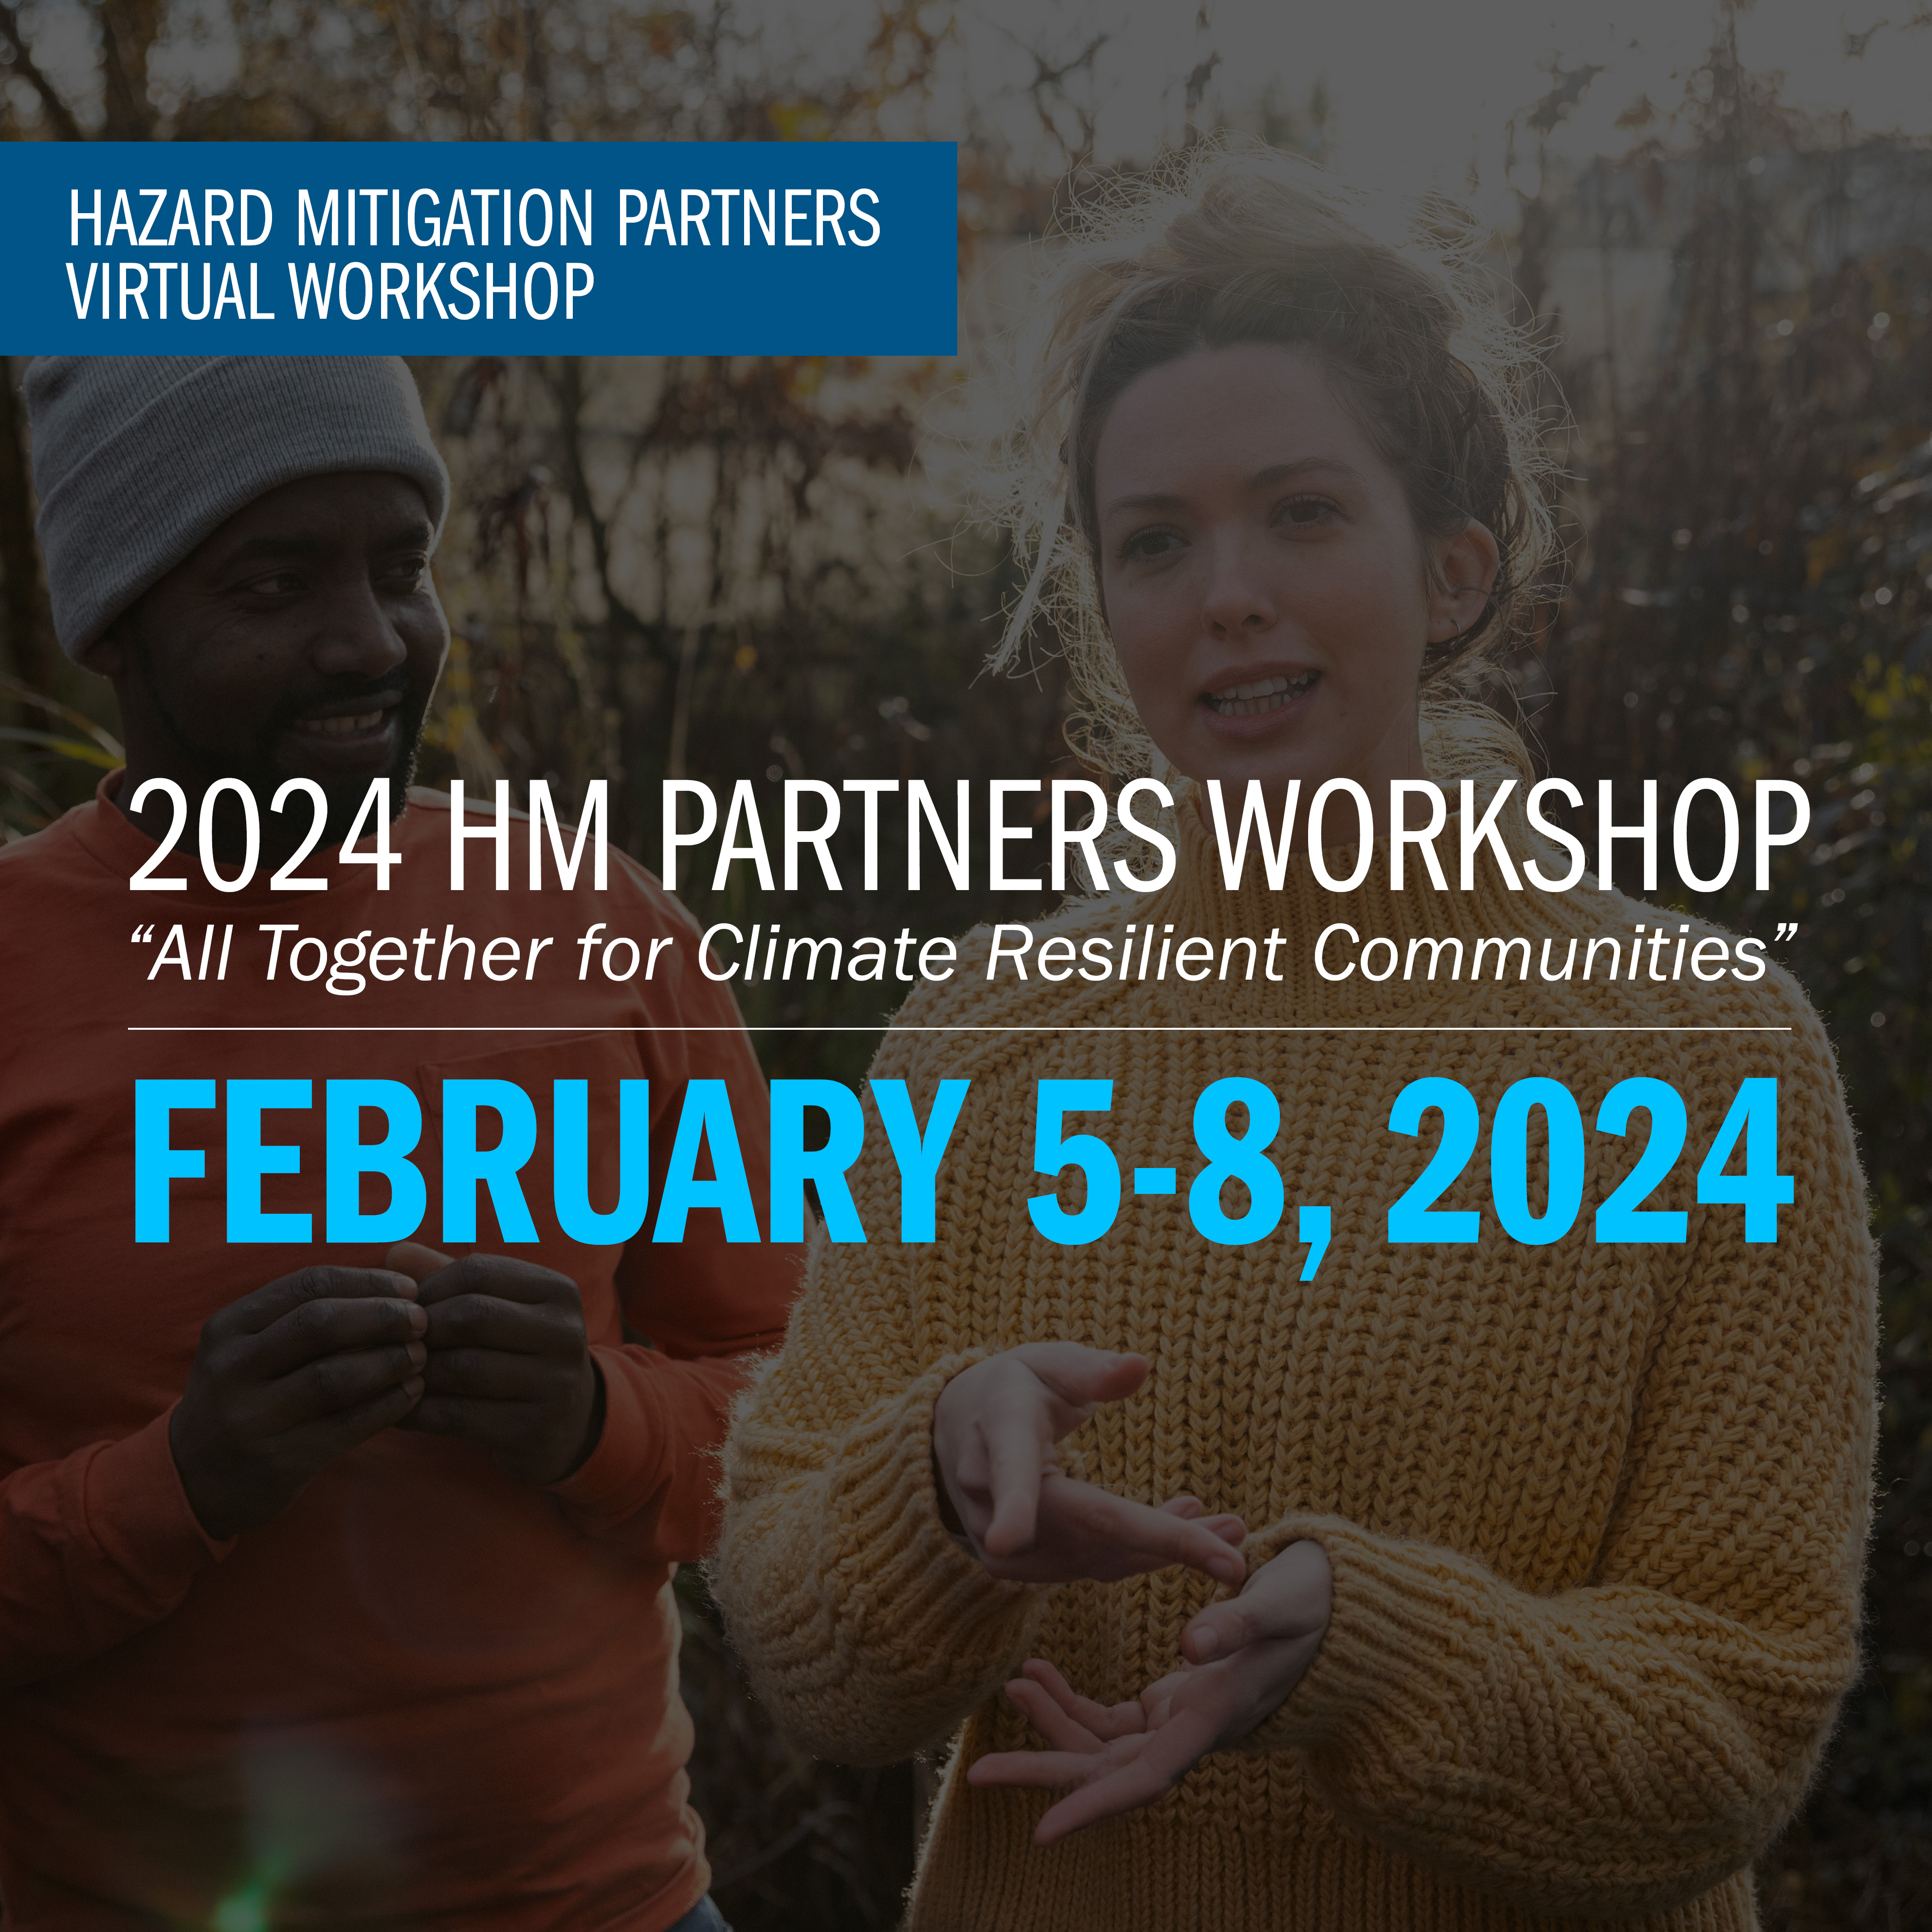 Graphic about the event. The text reads, "2024 HM Partners Workshop 'All Together for Climate Resilient Communities' February 5-8, 2024"